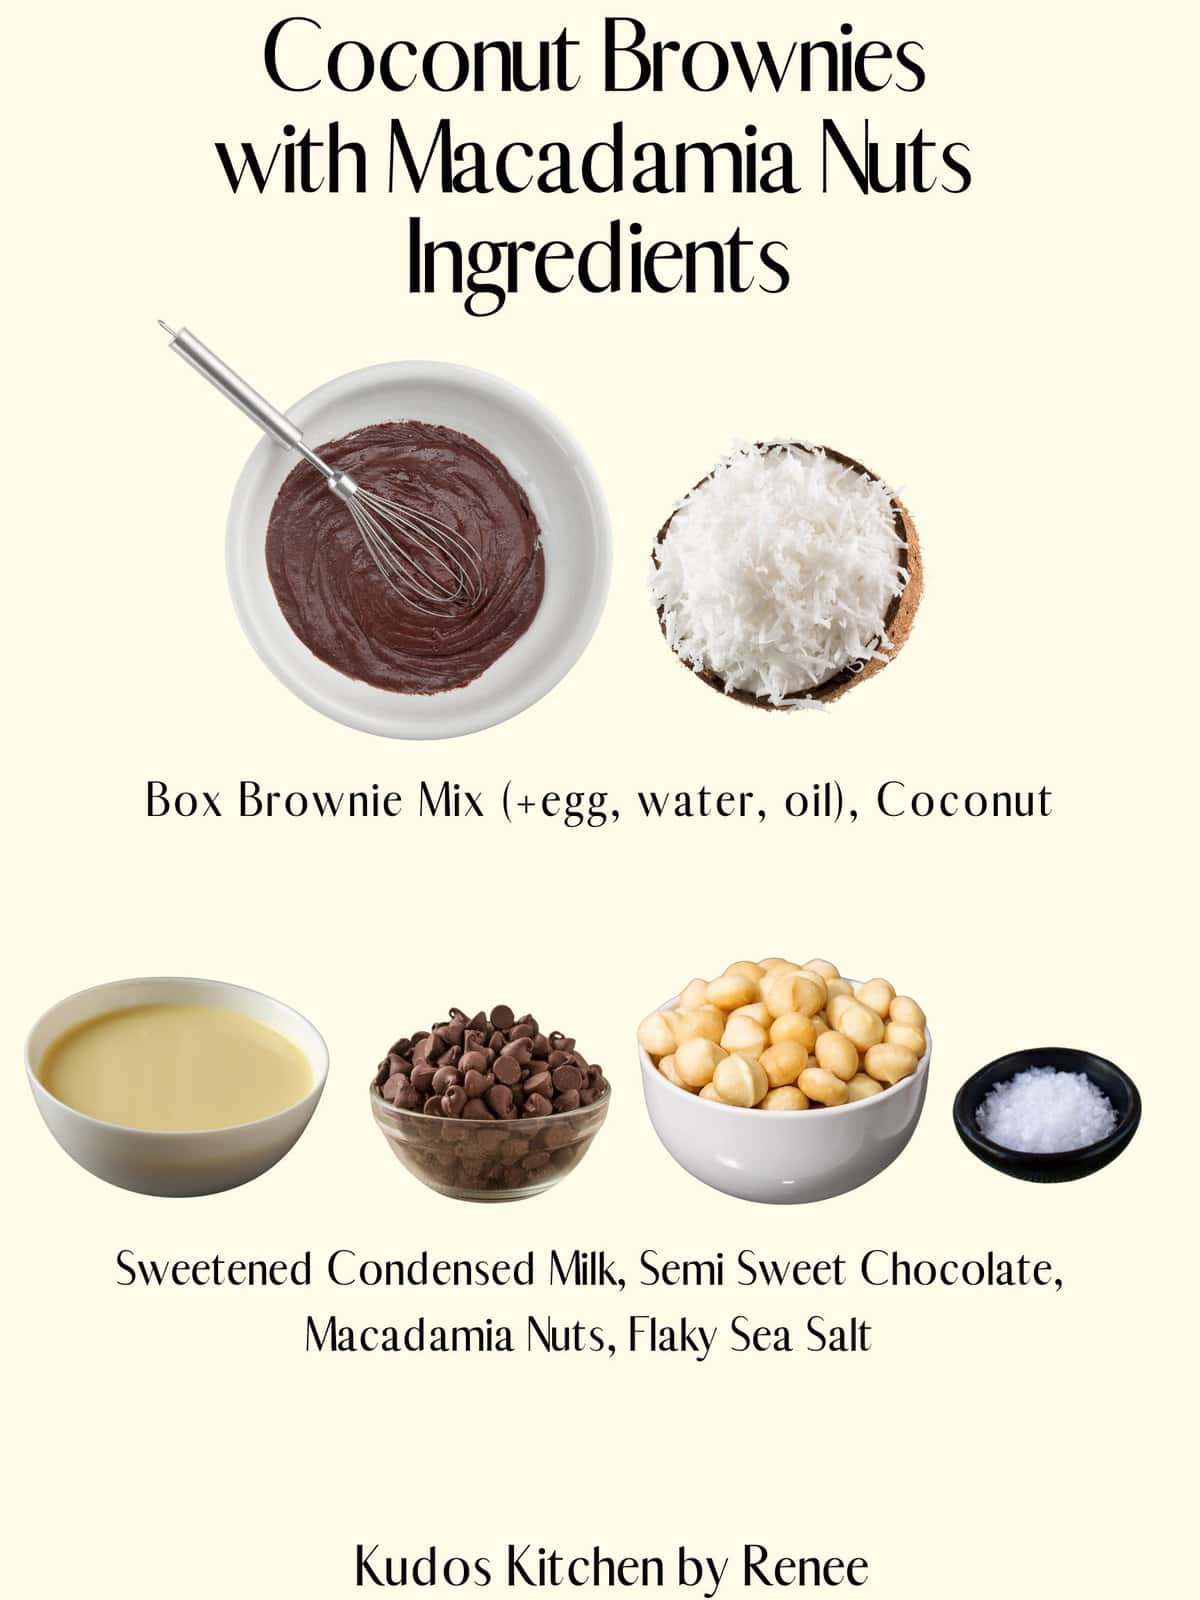 Visual ingredient list for making Coconut Brownies with Macadamia Nuts.